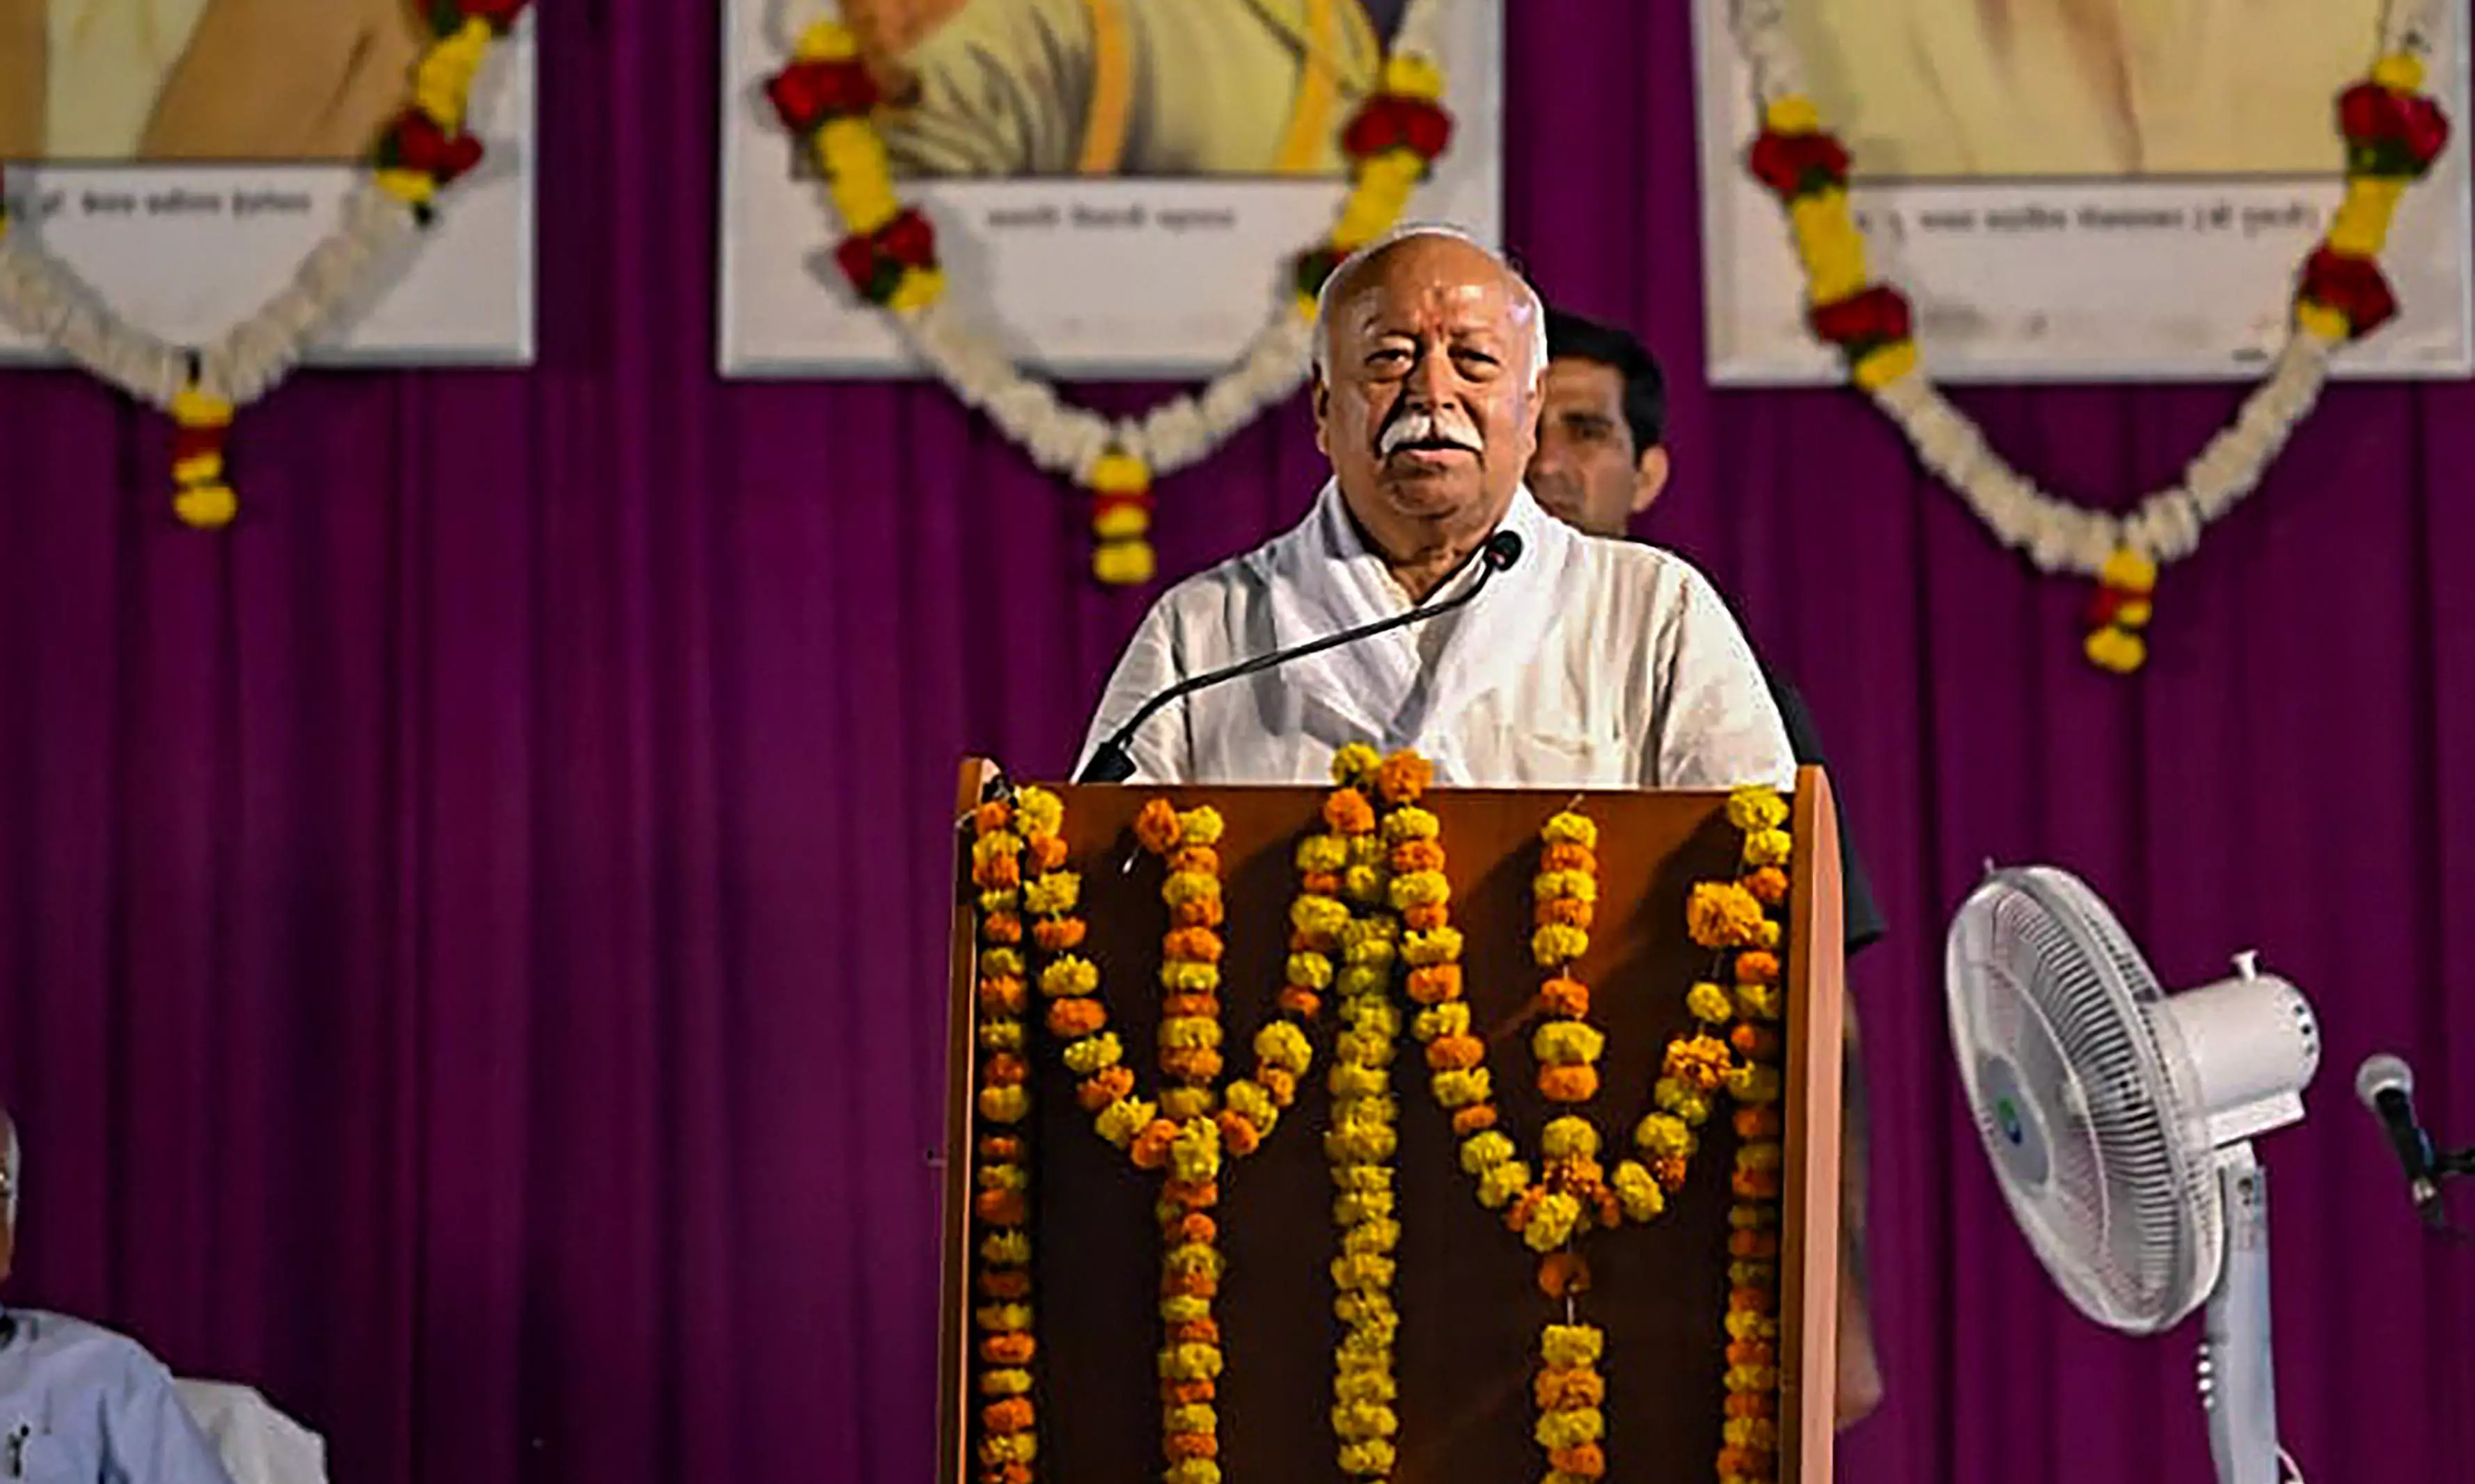 Ayodhya Ram temple result of struggle, sacrifices of 30 years: Mohan Bhagwat